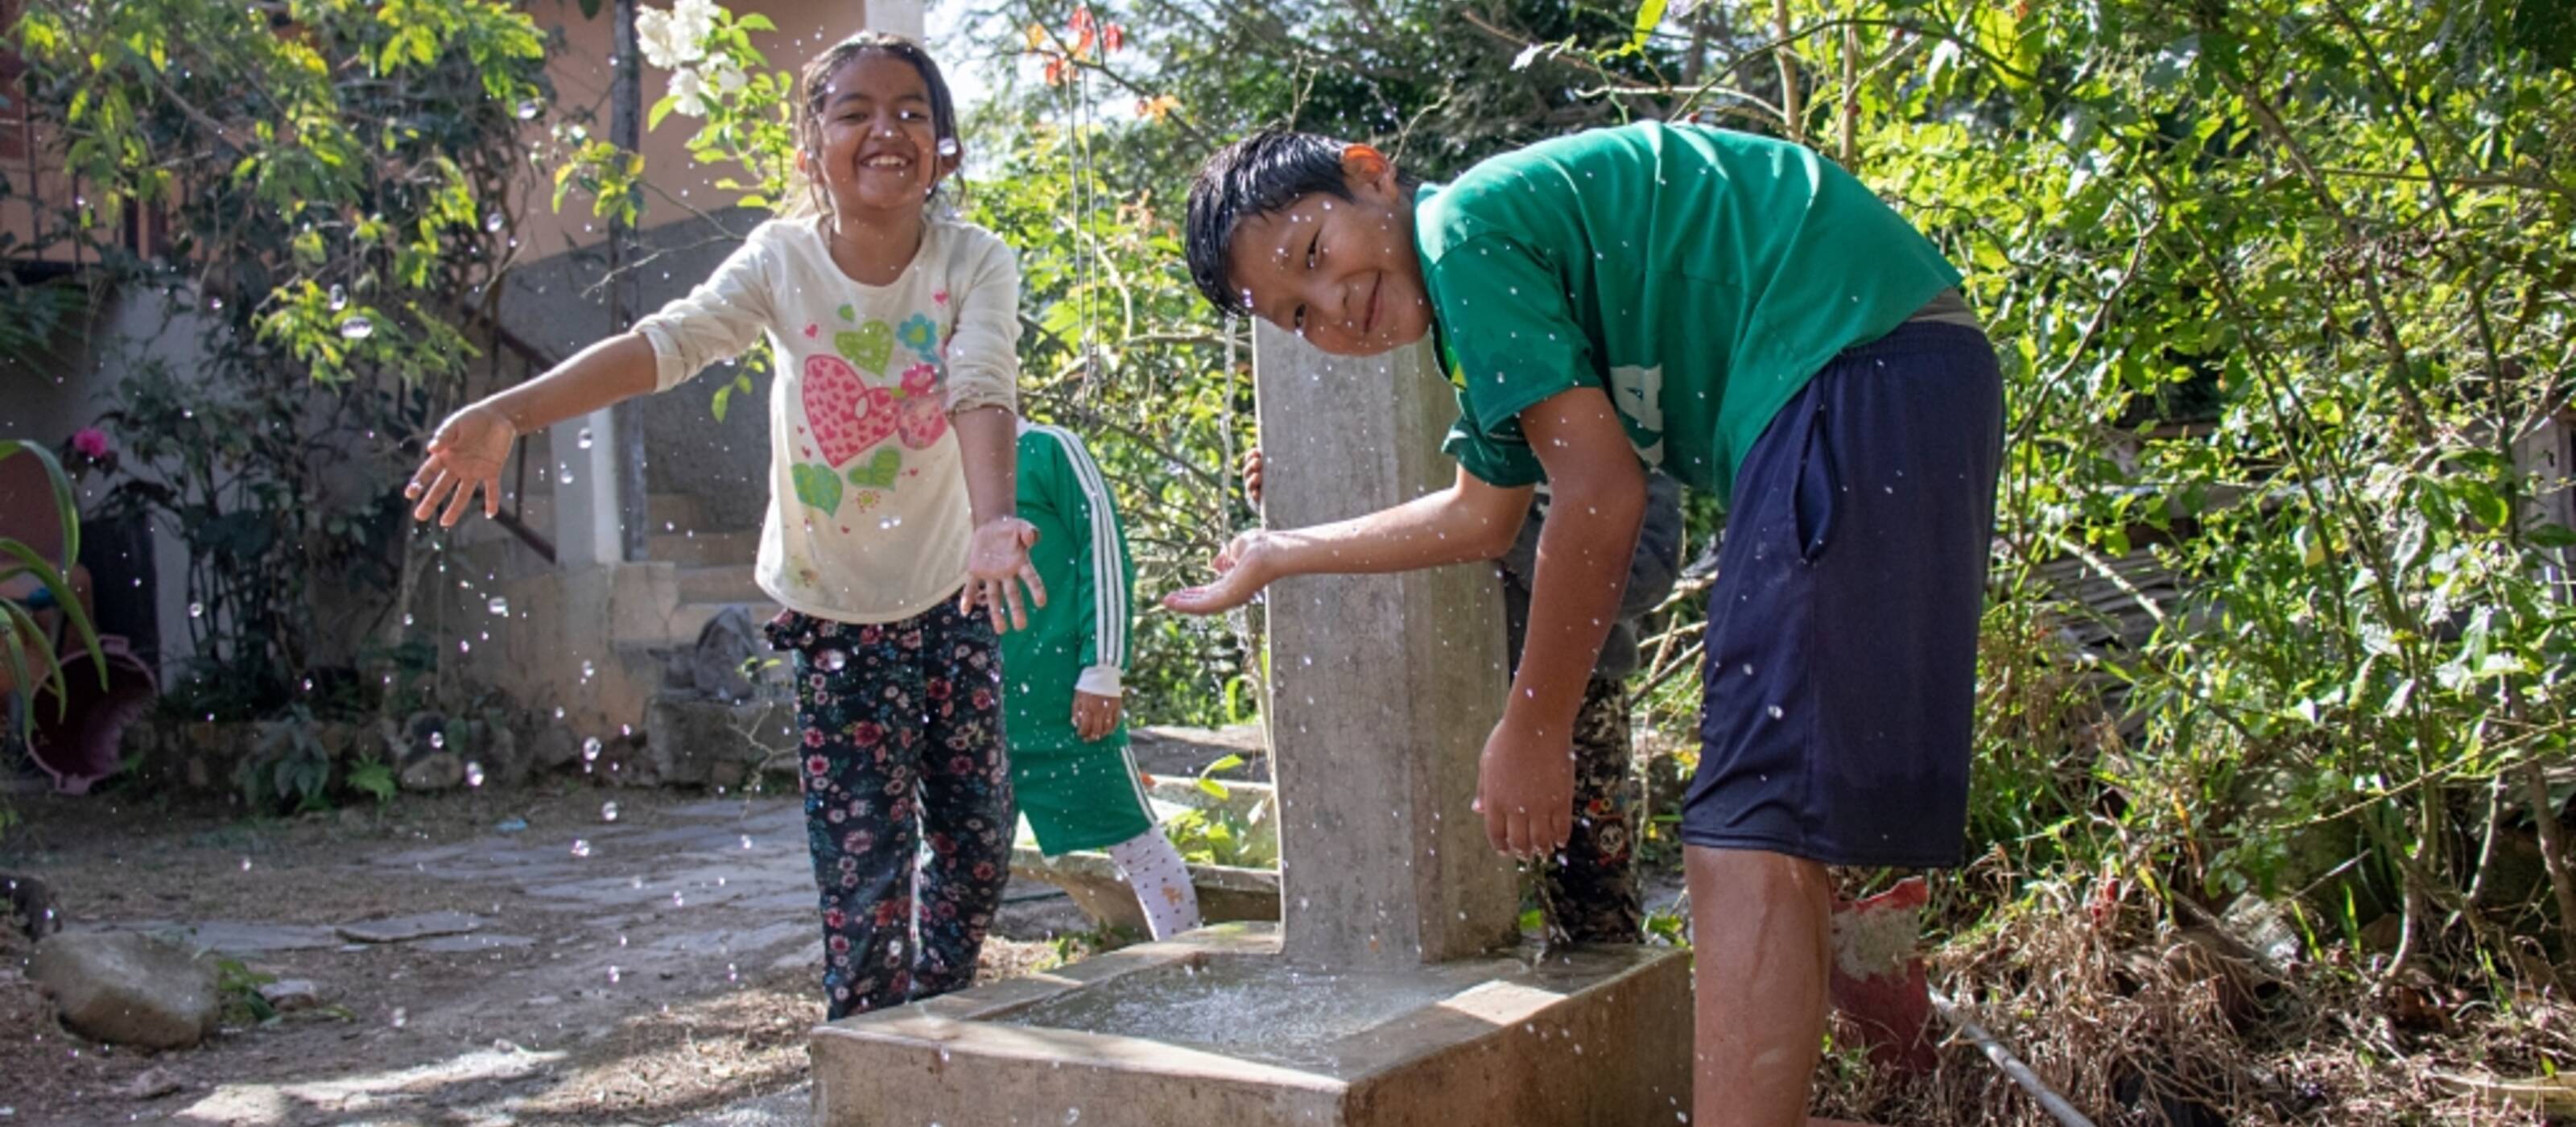 Improved access to drinking water is a long-term area of work for Caritas.